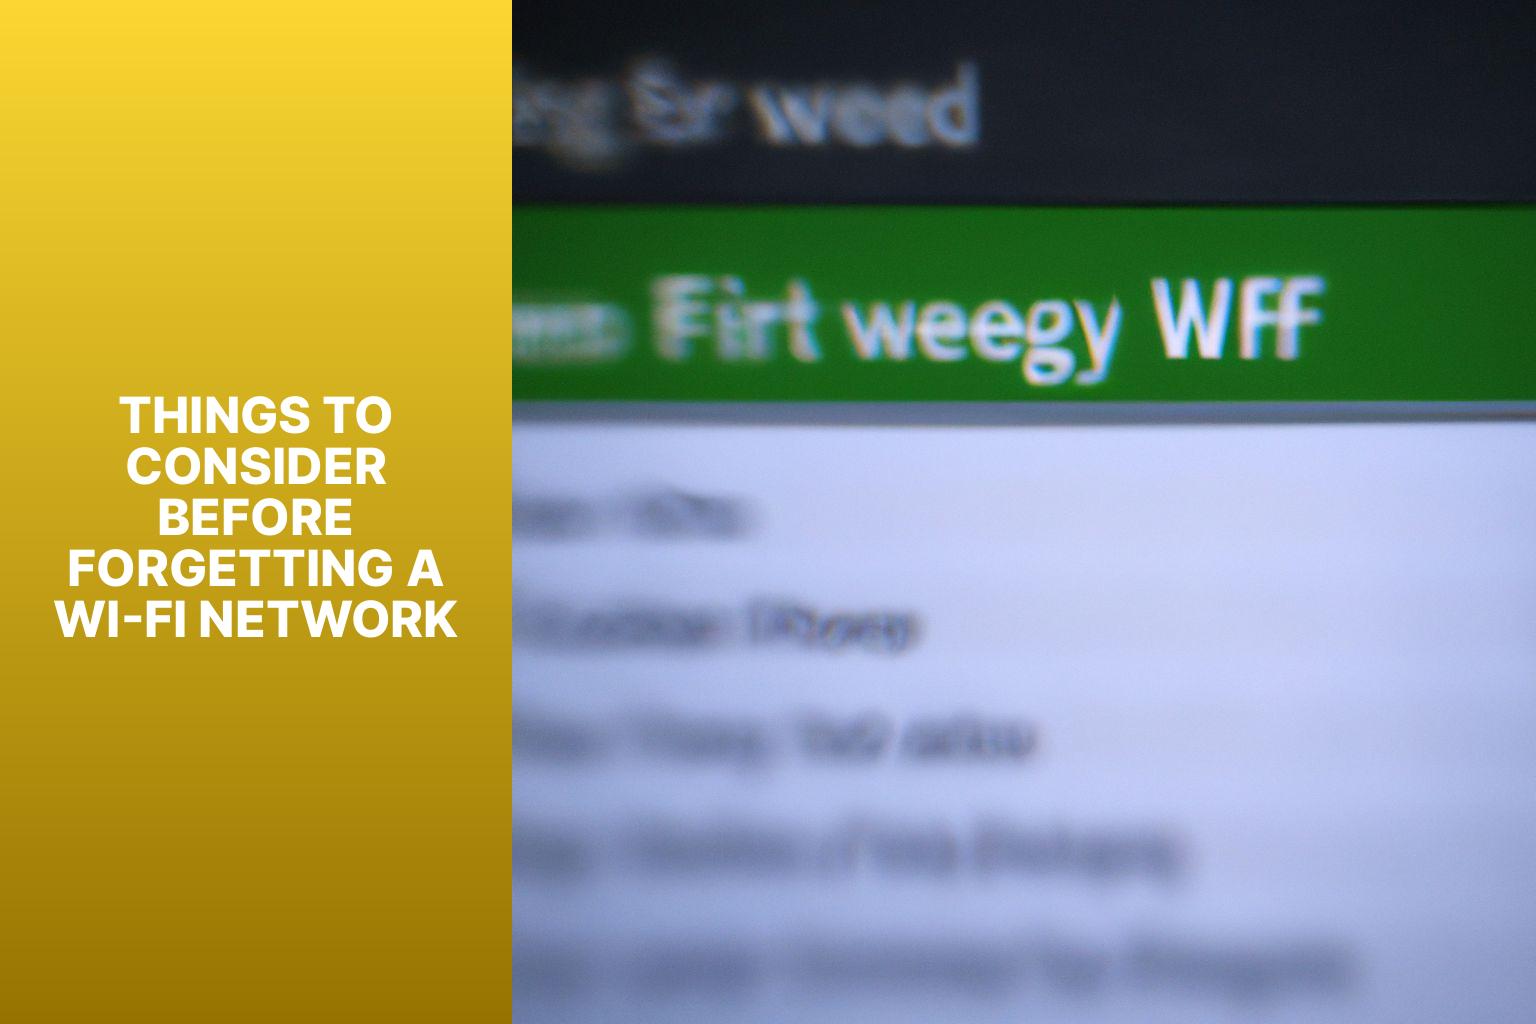 Things to Consider Before Forgetting a Wi-Fi Network - how to forget a wifi network on windows 10 